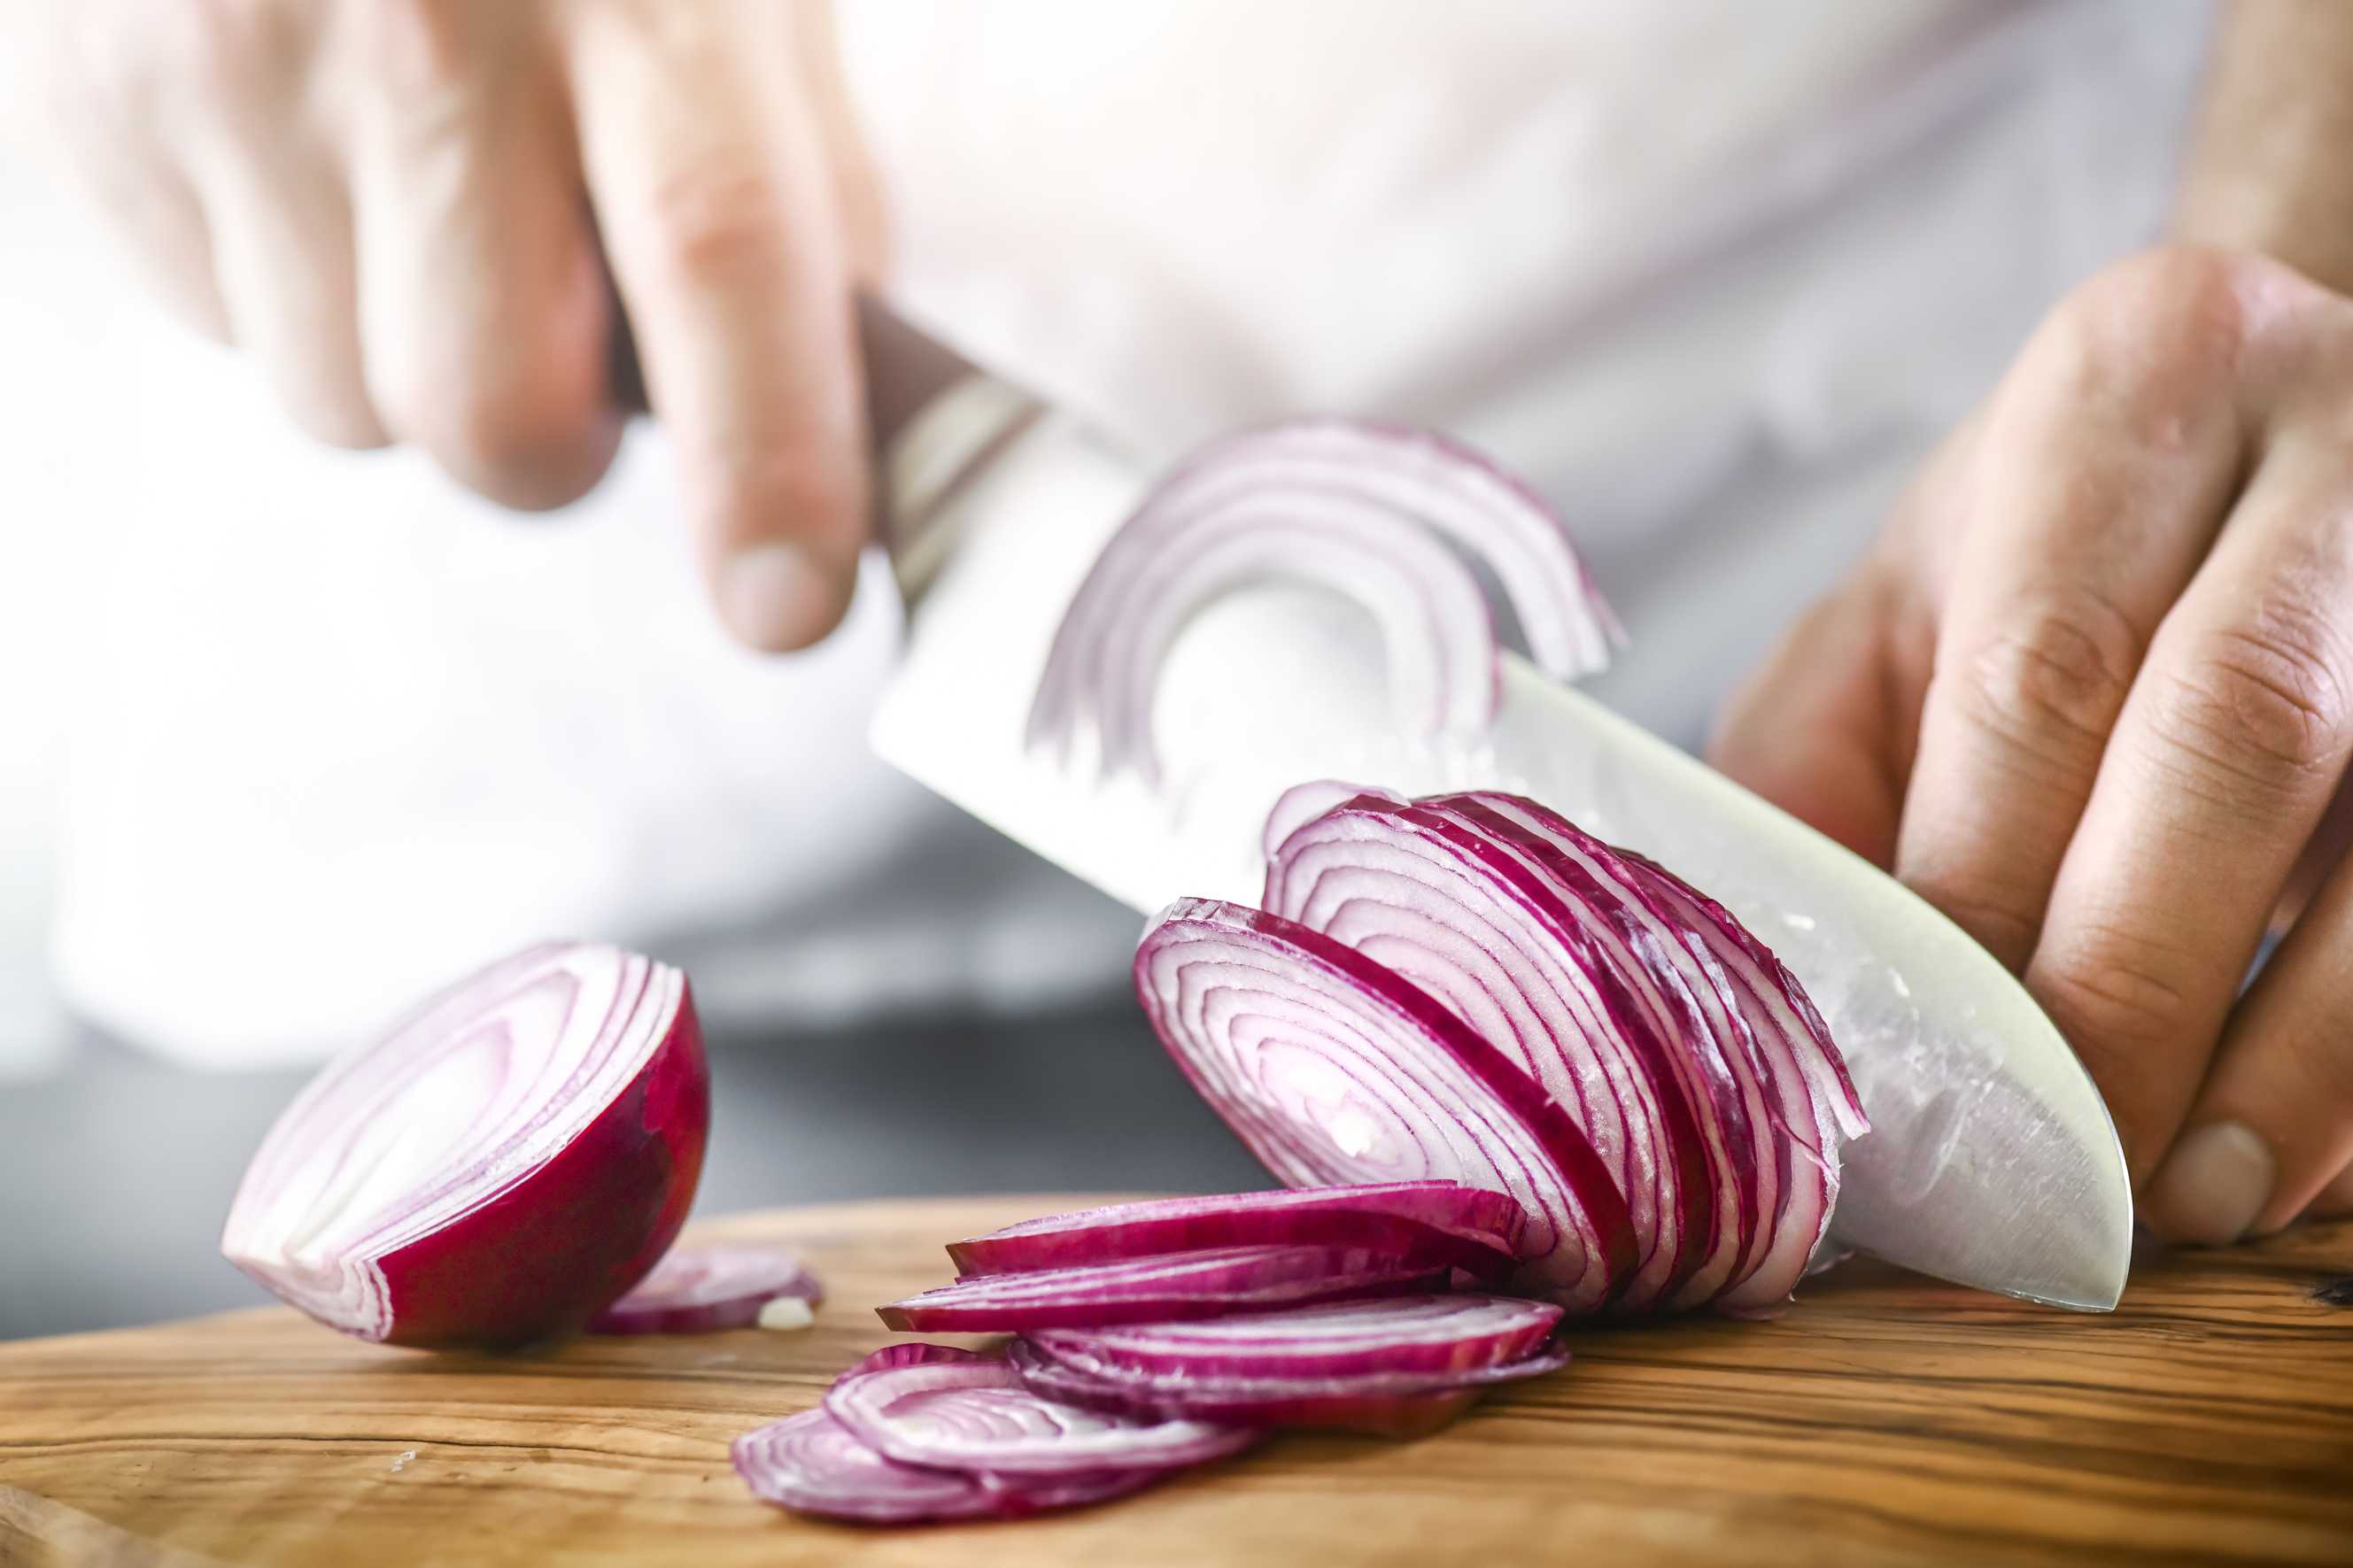 microsoft, ask a nutrition professional: does onion create gas in stomach?